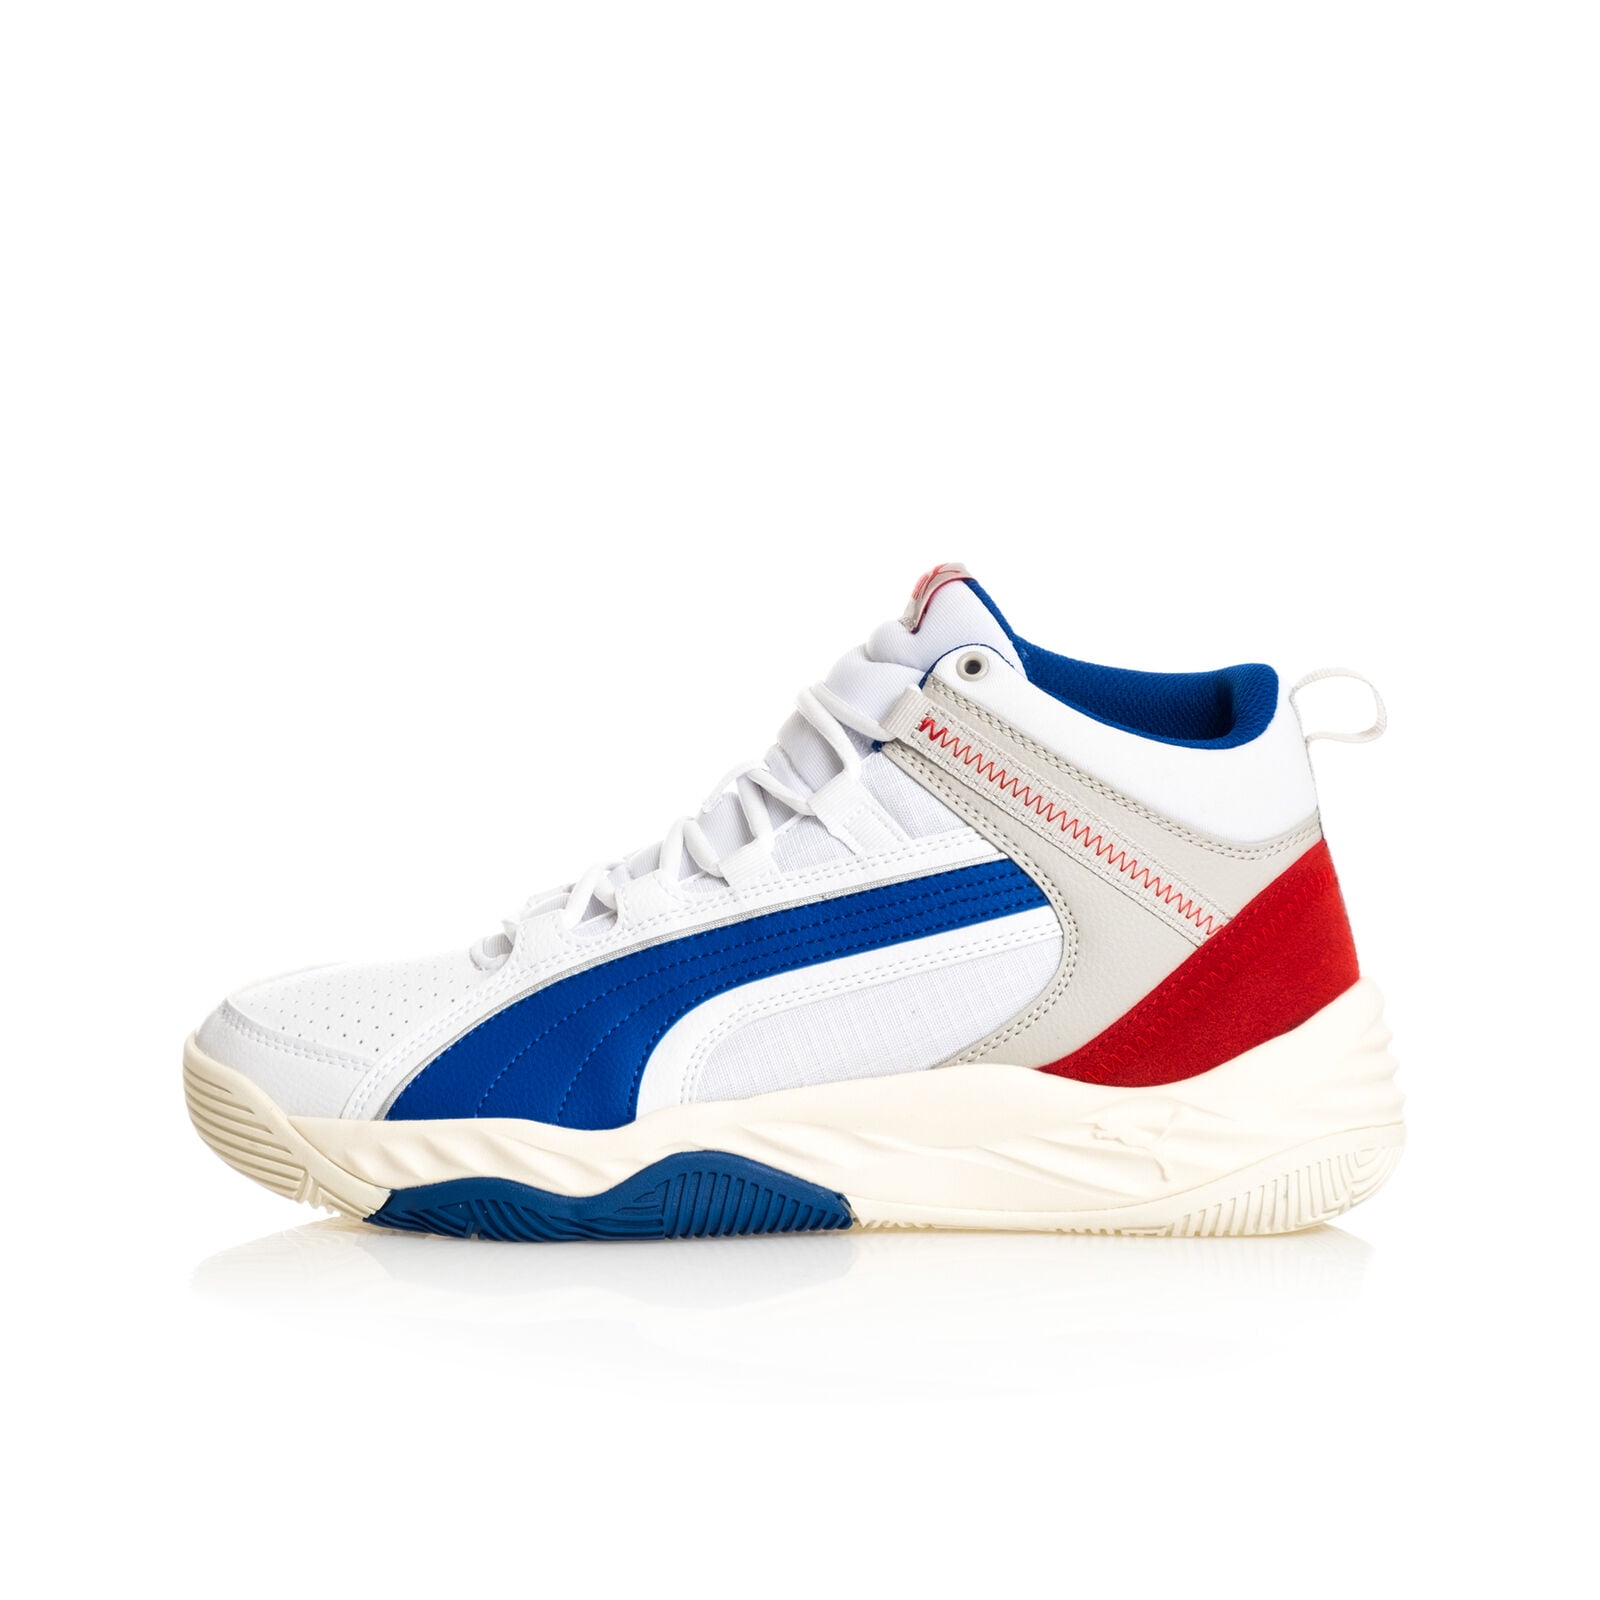 Buy Puma Rebound Street Evo IDP Classic Sneakers Shoes For Men (Blue)  Online at Low Prices in India - Paytmmall.com